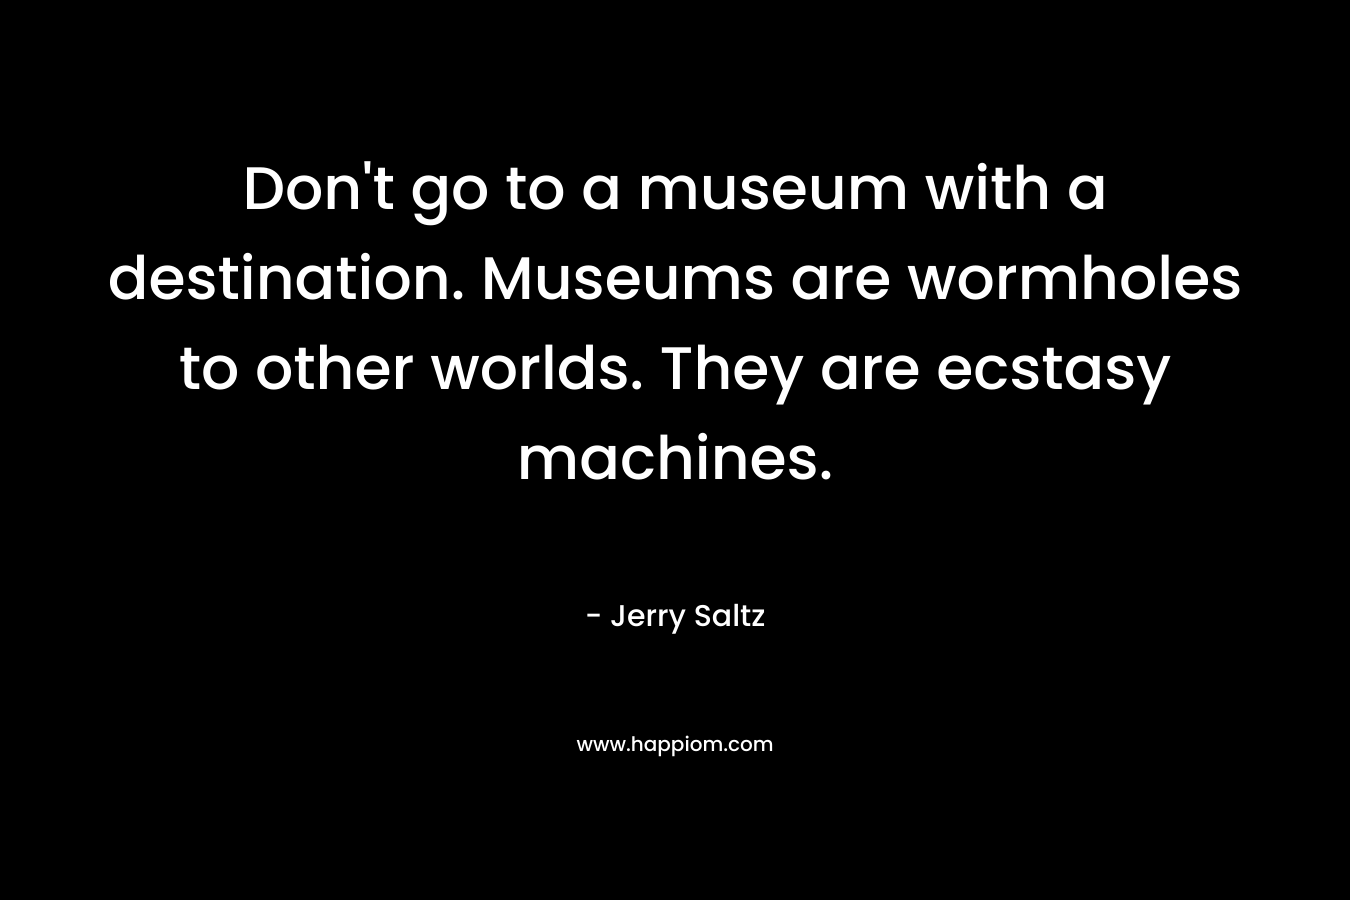 Don't go to a museum with a destination. Museums are wormholes to other worlds. They are ecstasy machines.